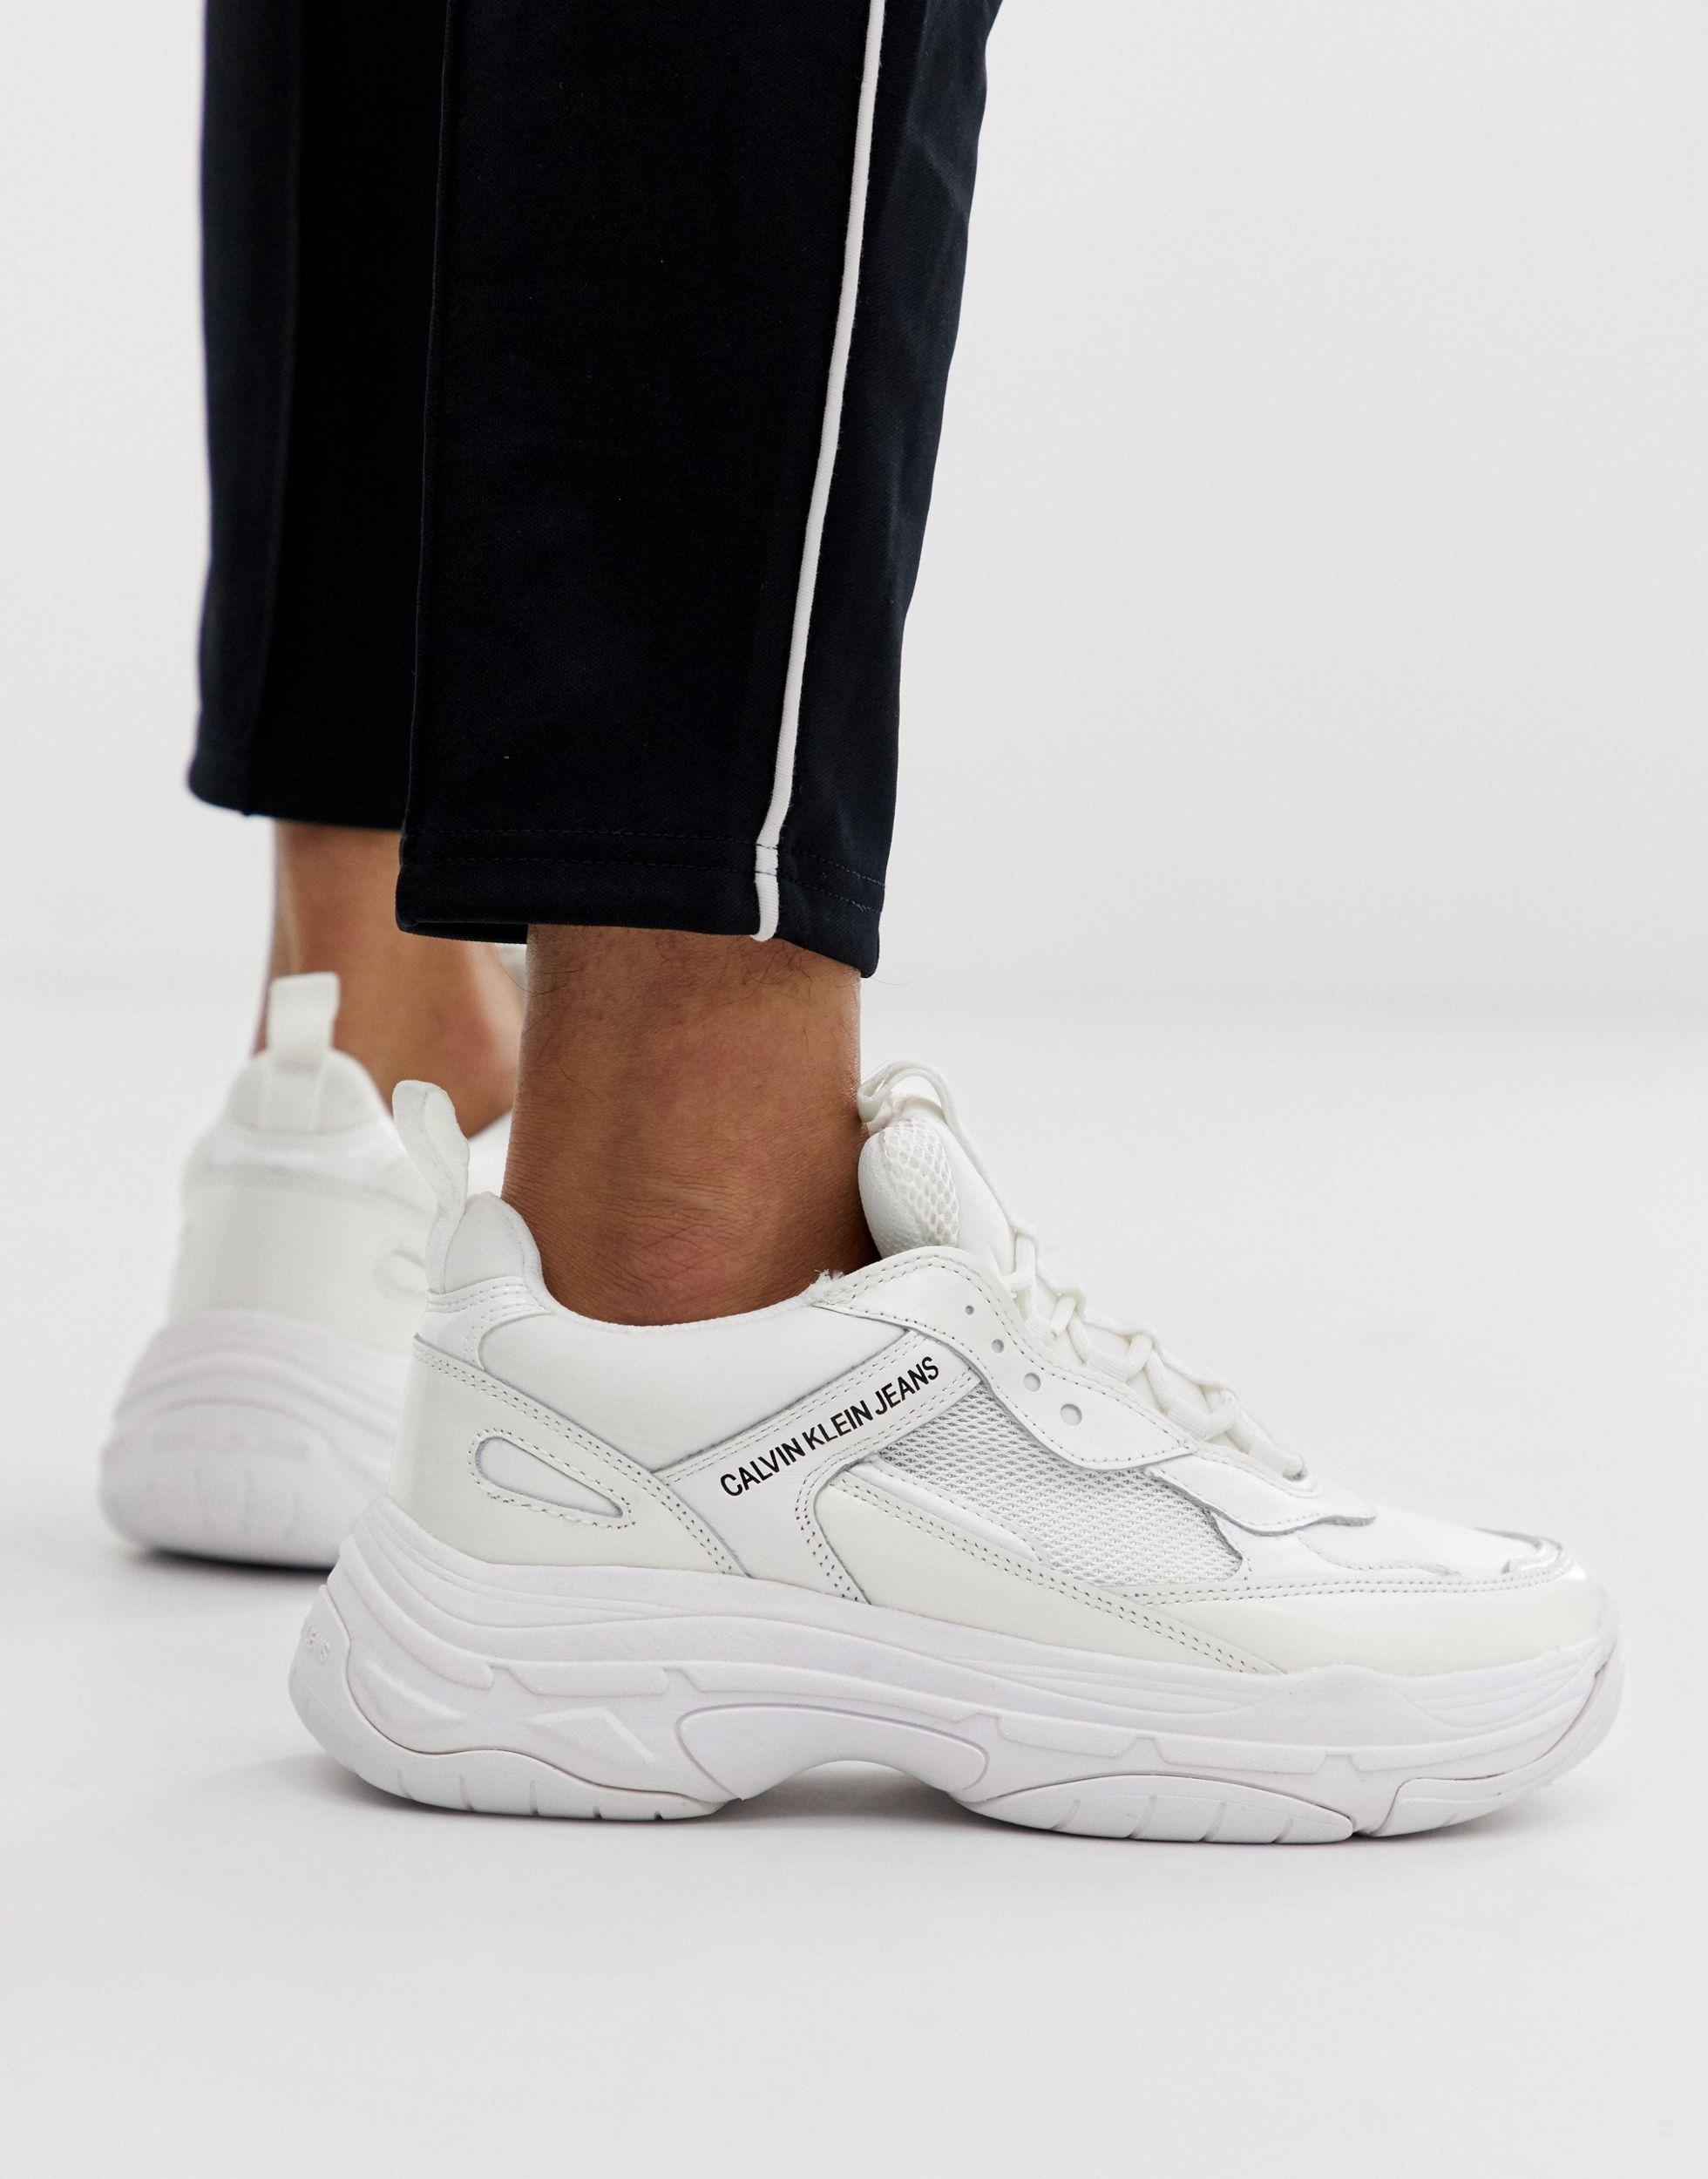 Calvin Klein Jeans Chunky Sneakers Factory Sale, SAVE 38% - aveclumiere.com